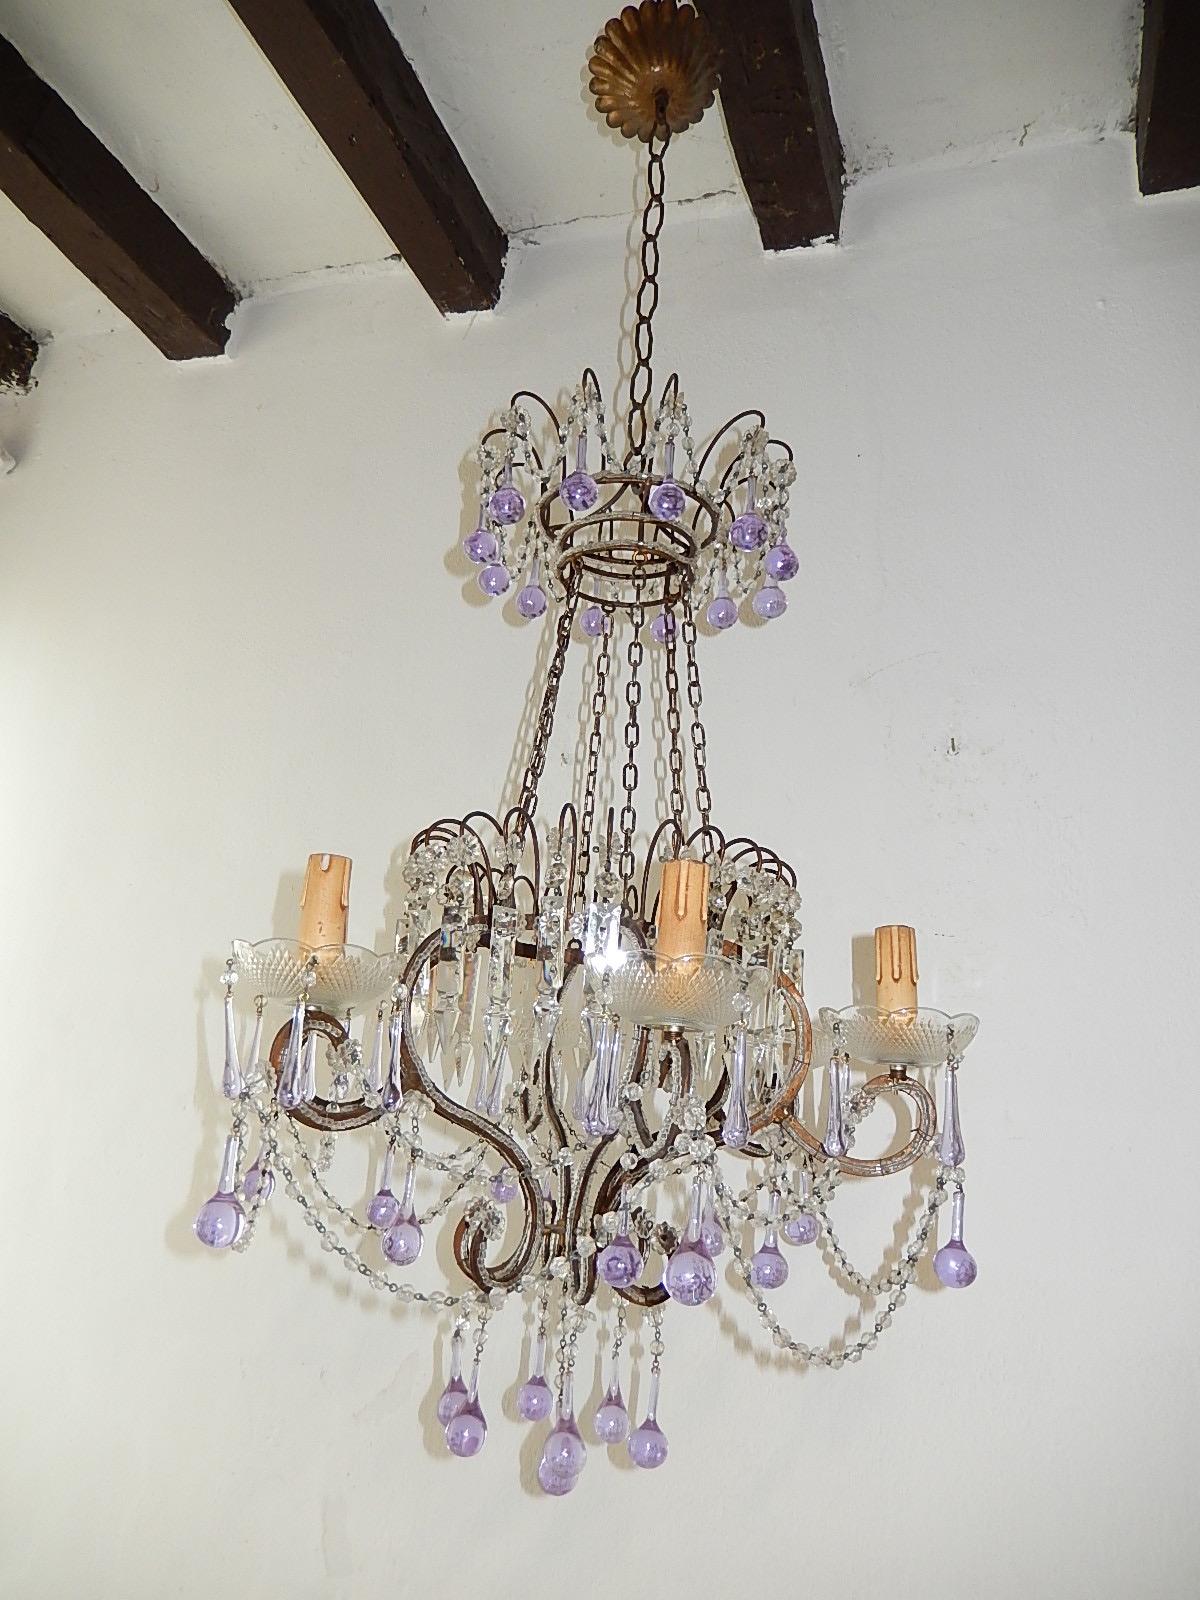 Housing six-light, will be rewired with appropriate sockets for country and ready to hang. Bobeches dripping with lavender Murano drops. Gilt metal with beading throughout. Spear prisms and florets with chains. Adorning bigger lavender Murano drops.